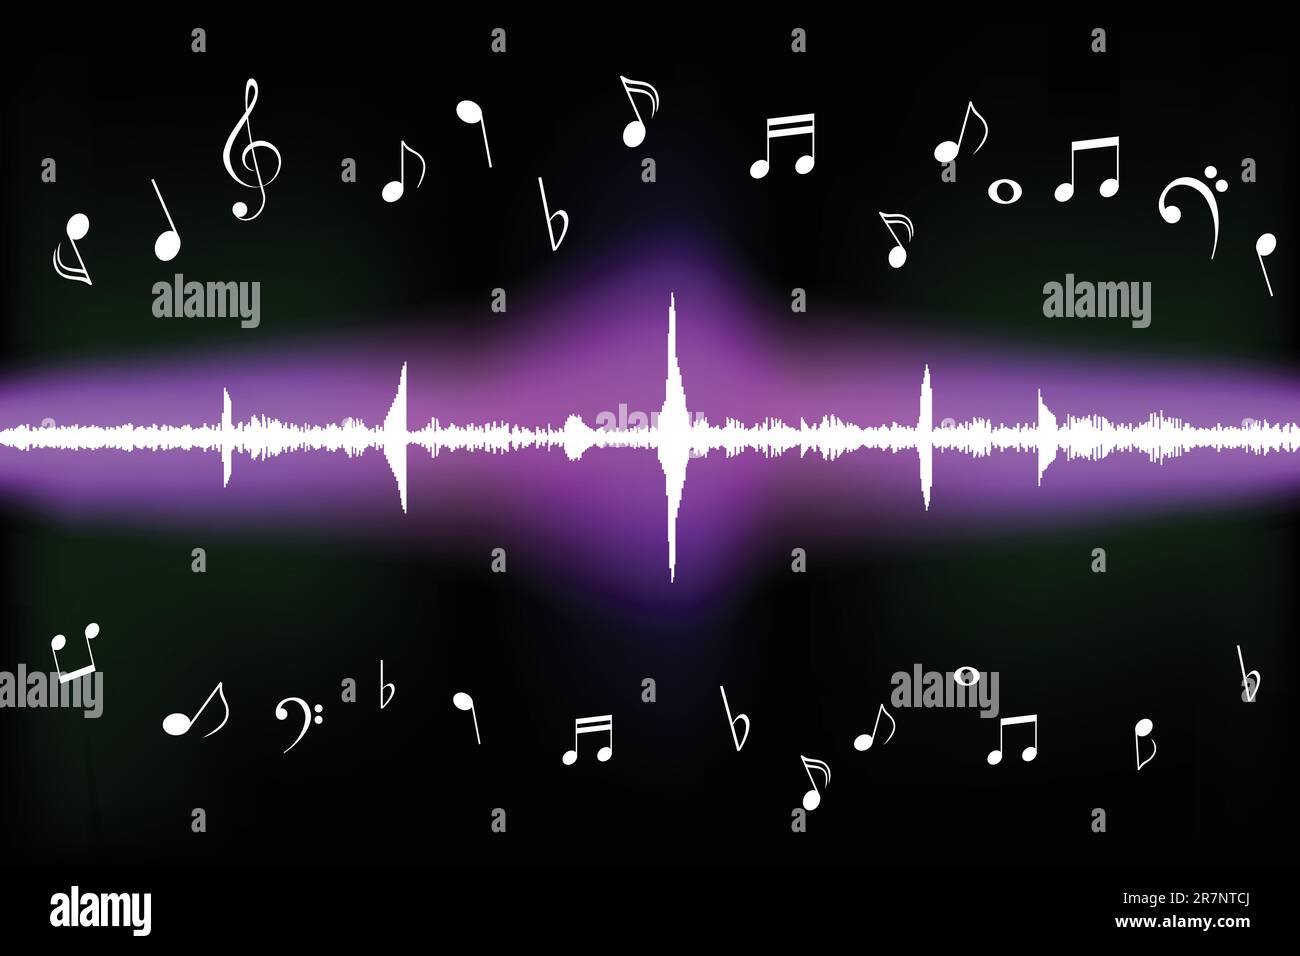 Sound wave with various music notes Stock Vector